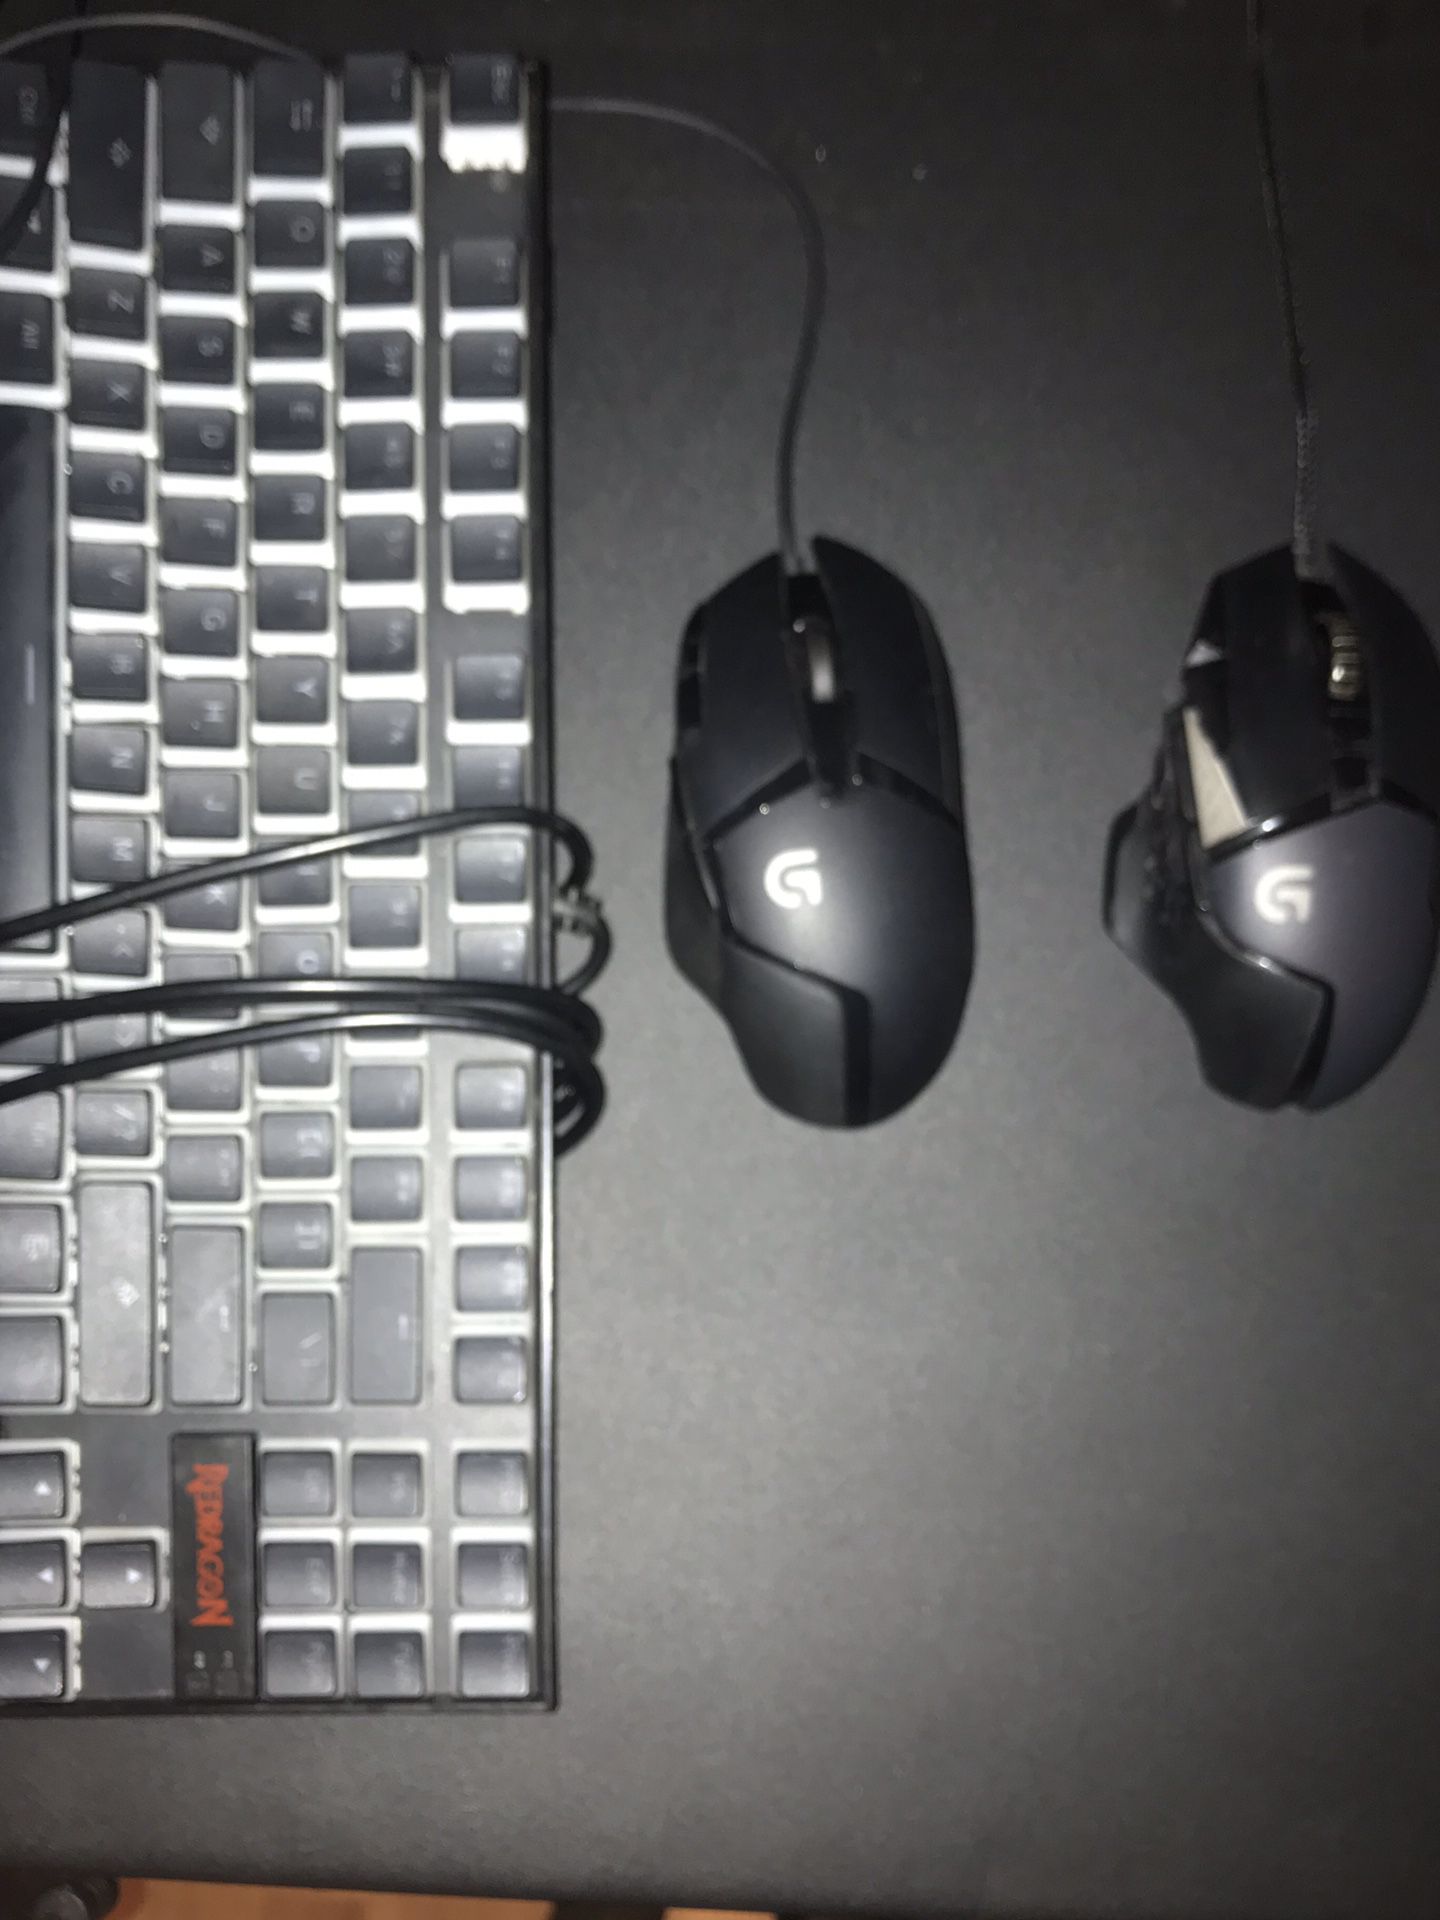 Gaming mouse and keyboard Prices in Description